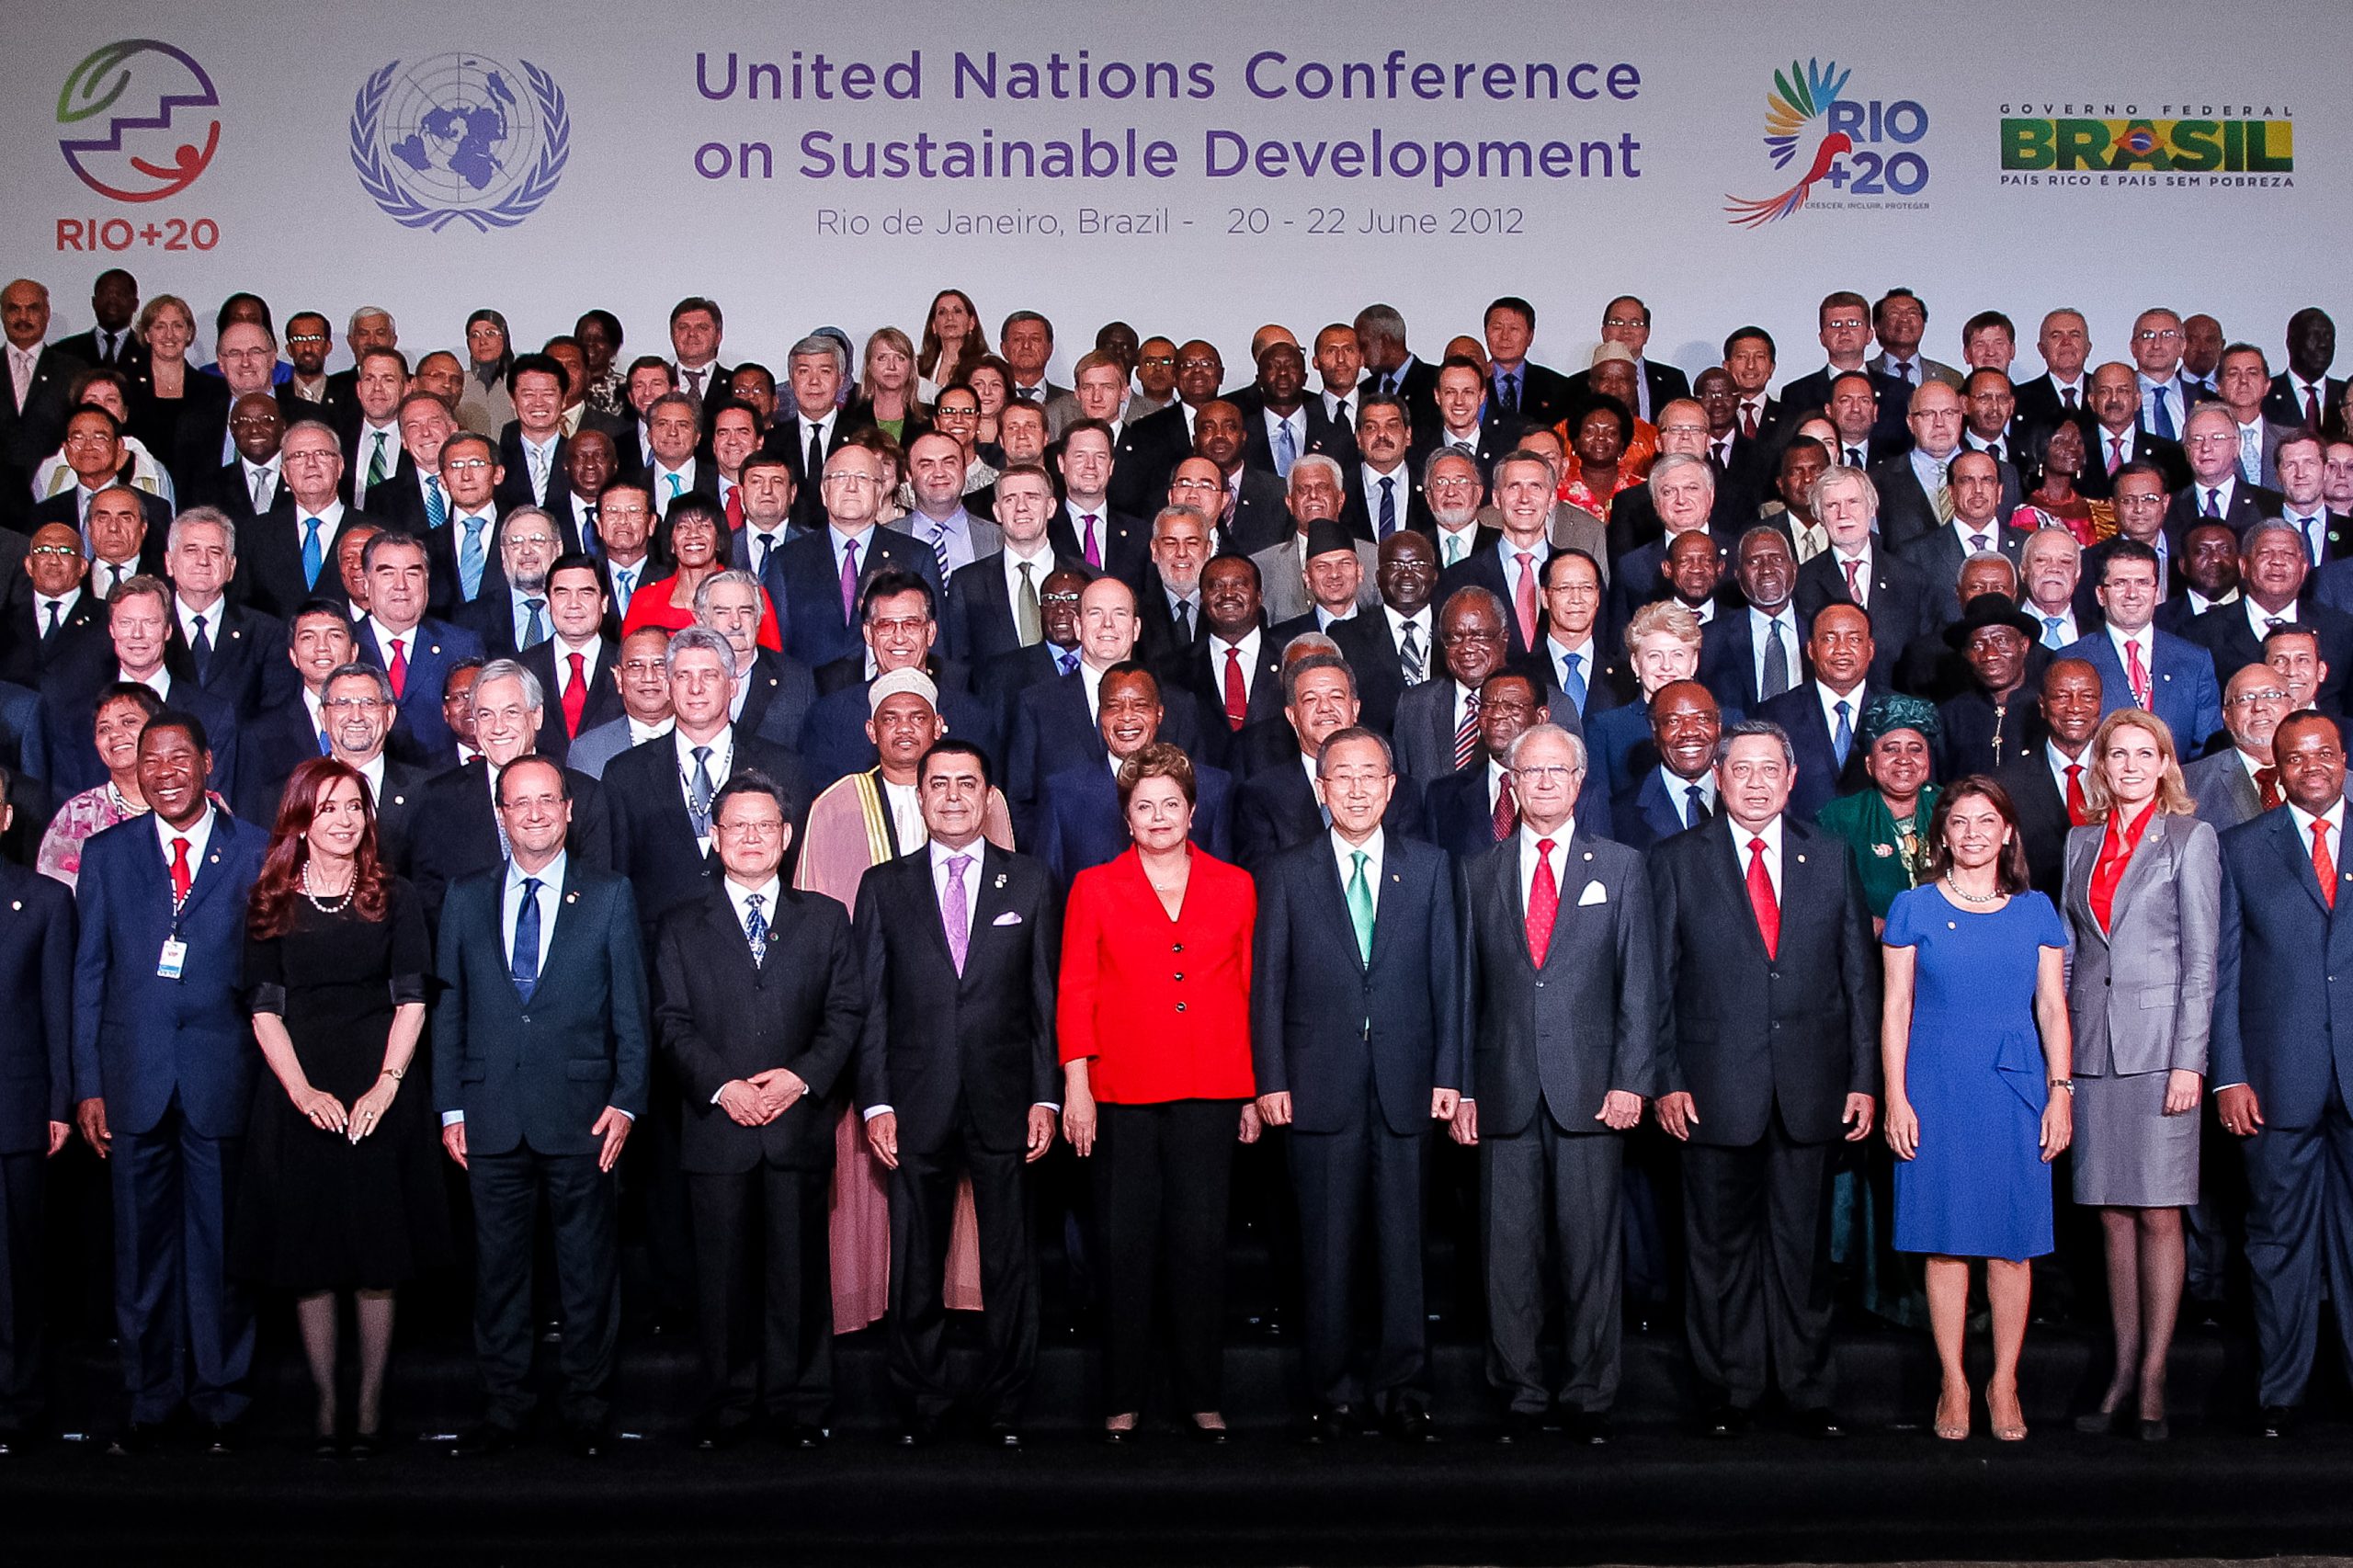 world_leaders_at_the_united_nations_conference_on_sustainable_development